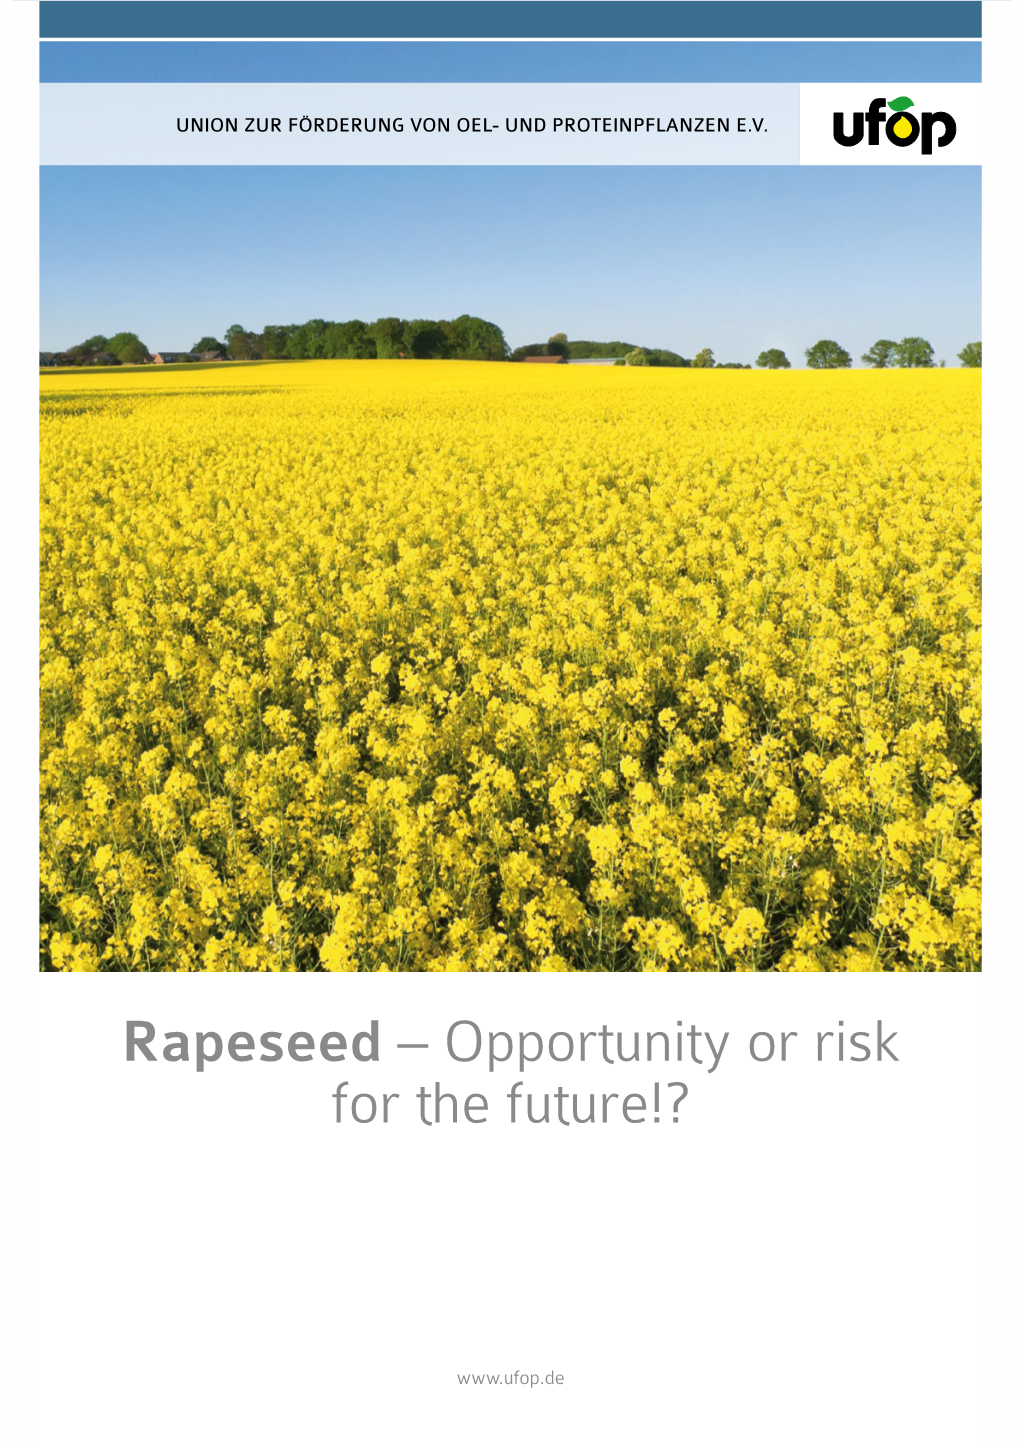 Rapeseed – Opportunity Or Risk for the Future!?